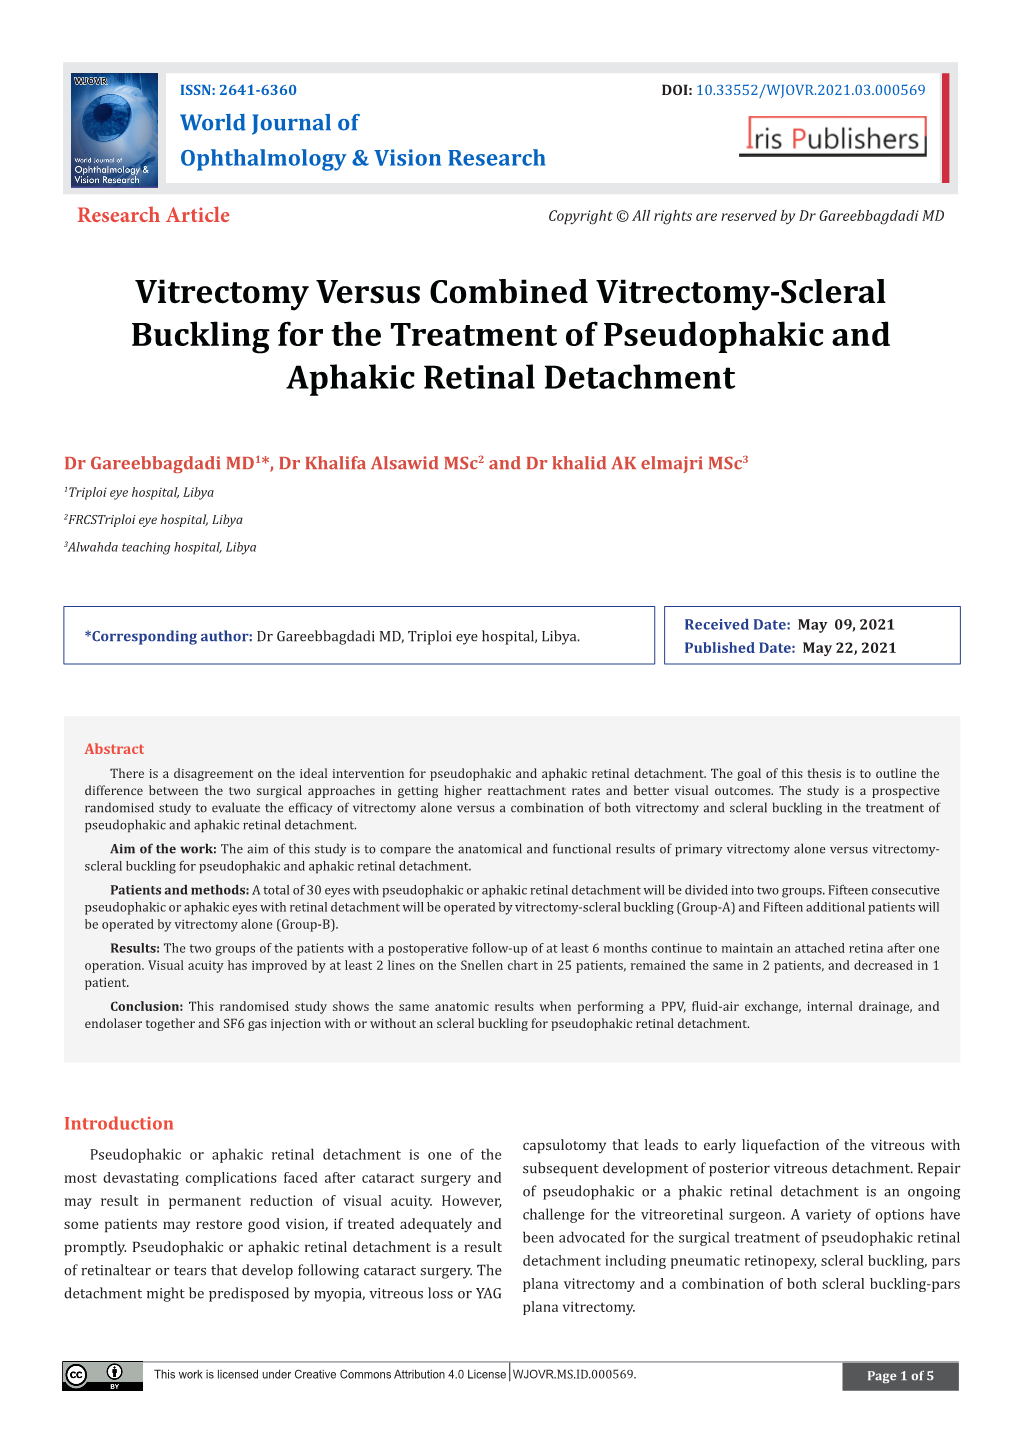 Vitrectomy Versus Combined Vitrectomy-Scleral Buckling for the Treatment of Pseudophakic and Aphakic Retinal Detachment